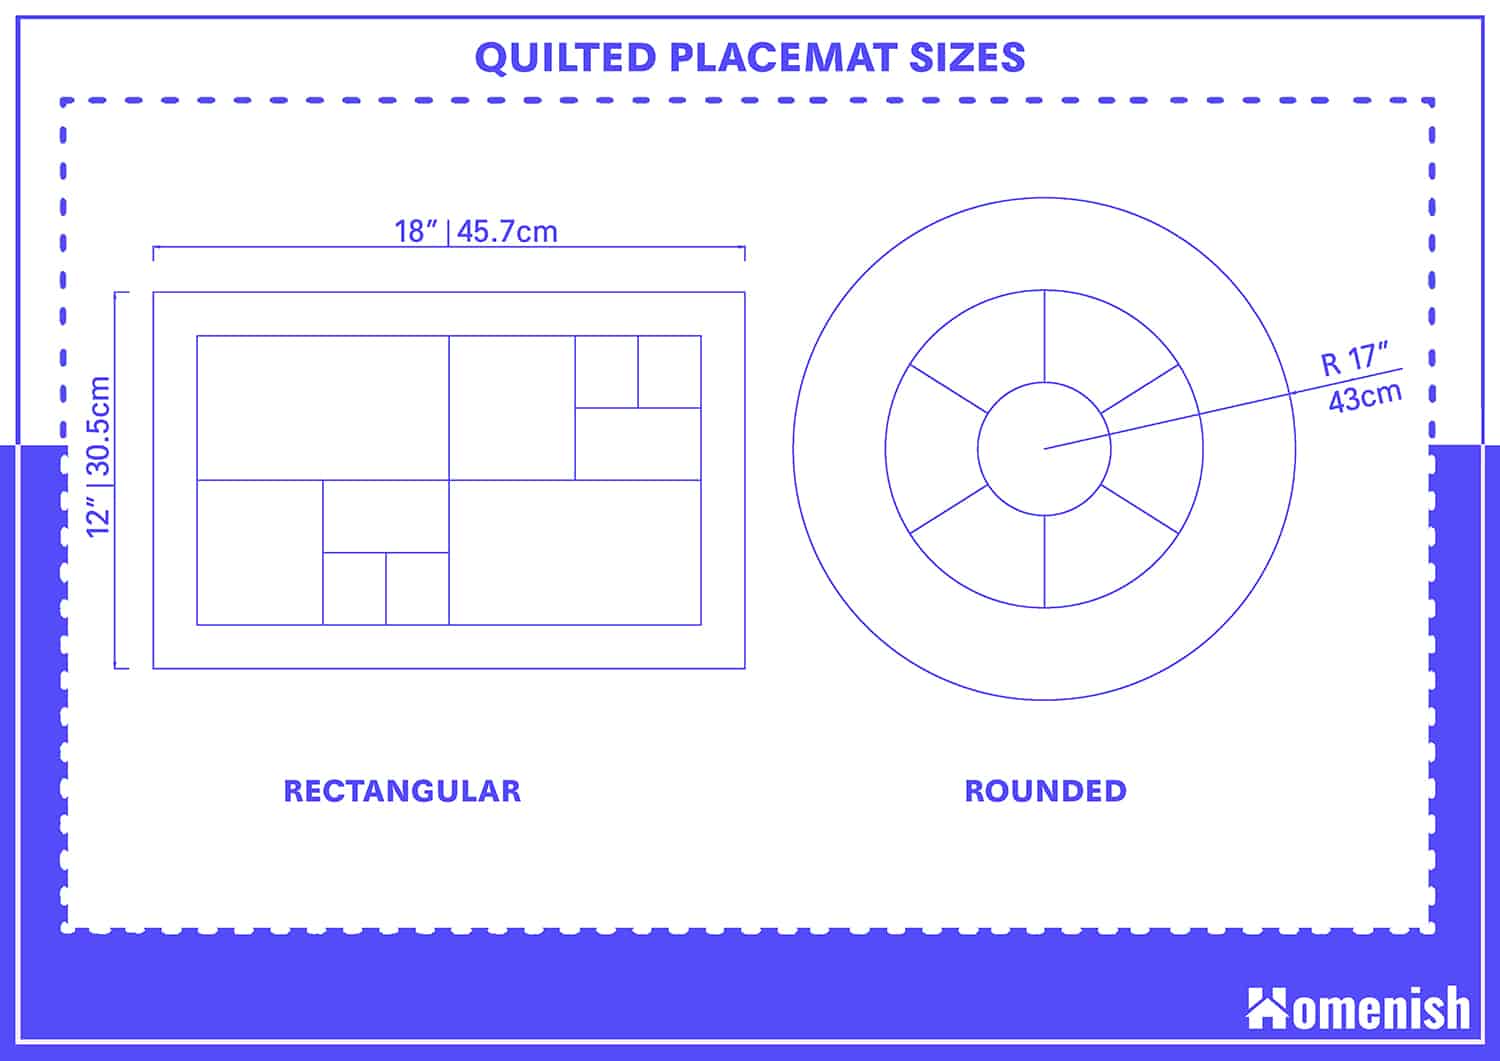 Quilted Placemat Sizes